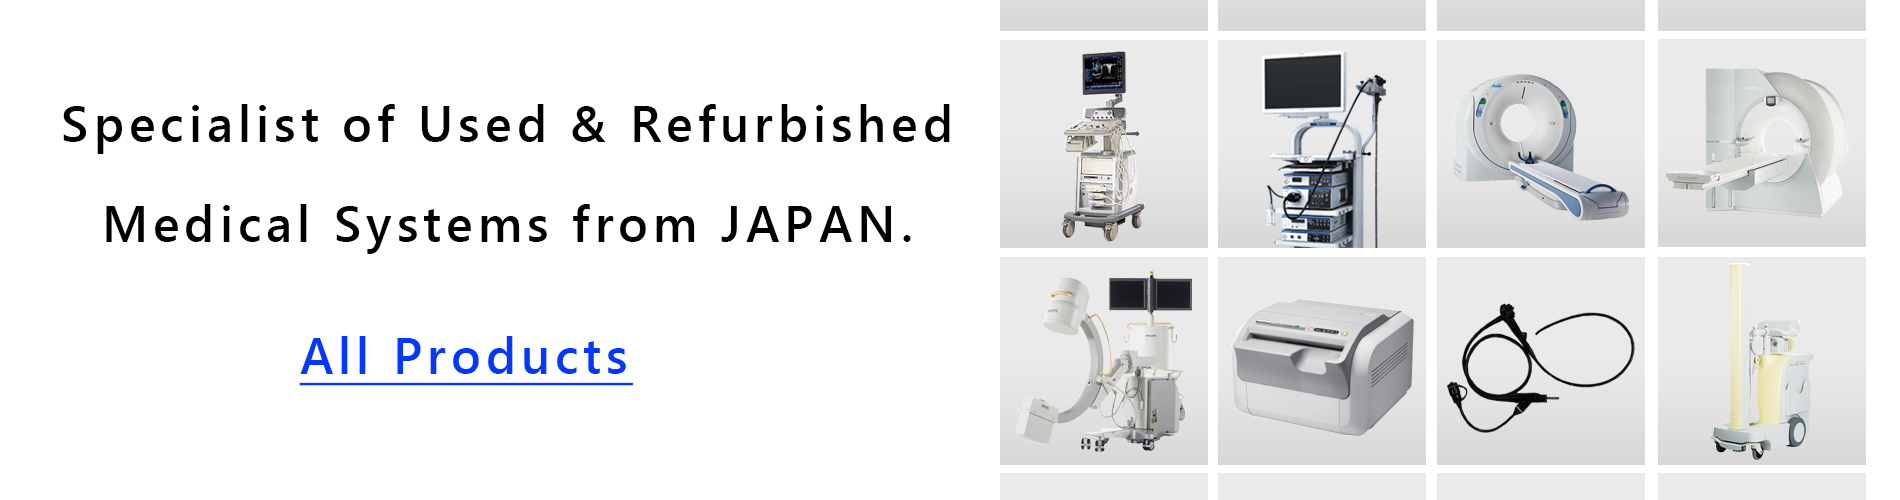 Specialist of Used & Refurbished Medical Systems from JAPAN.